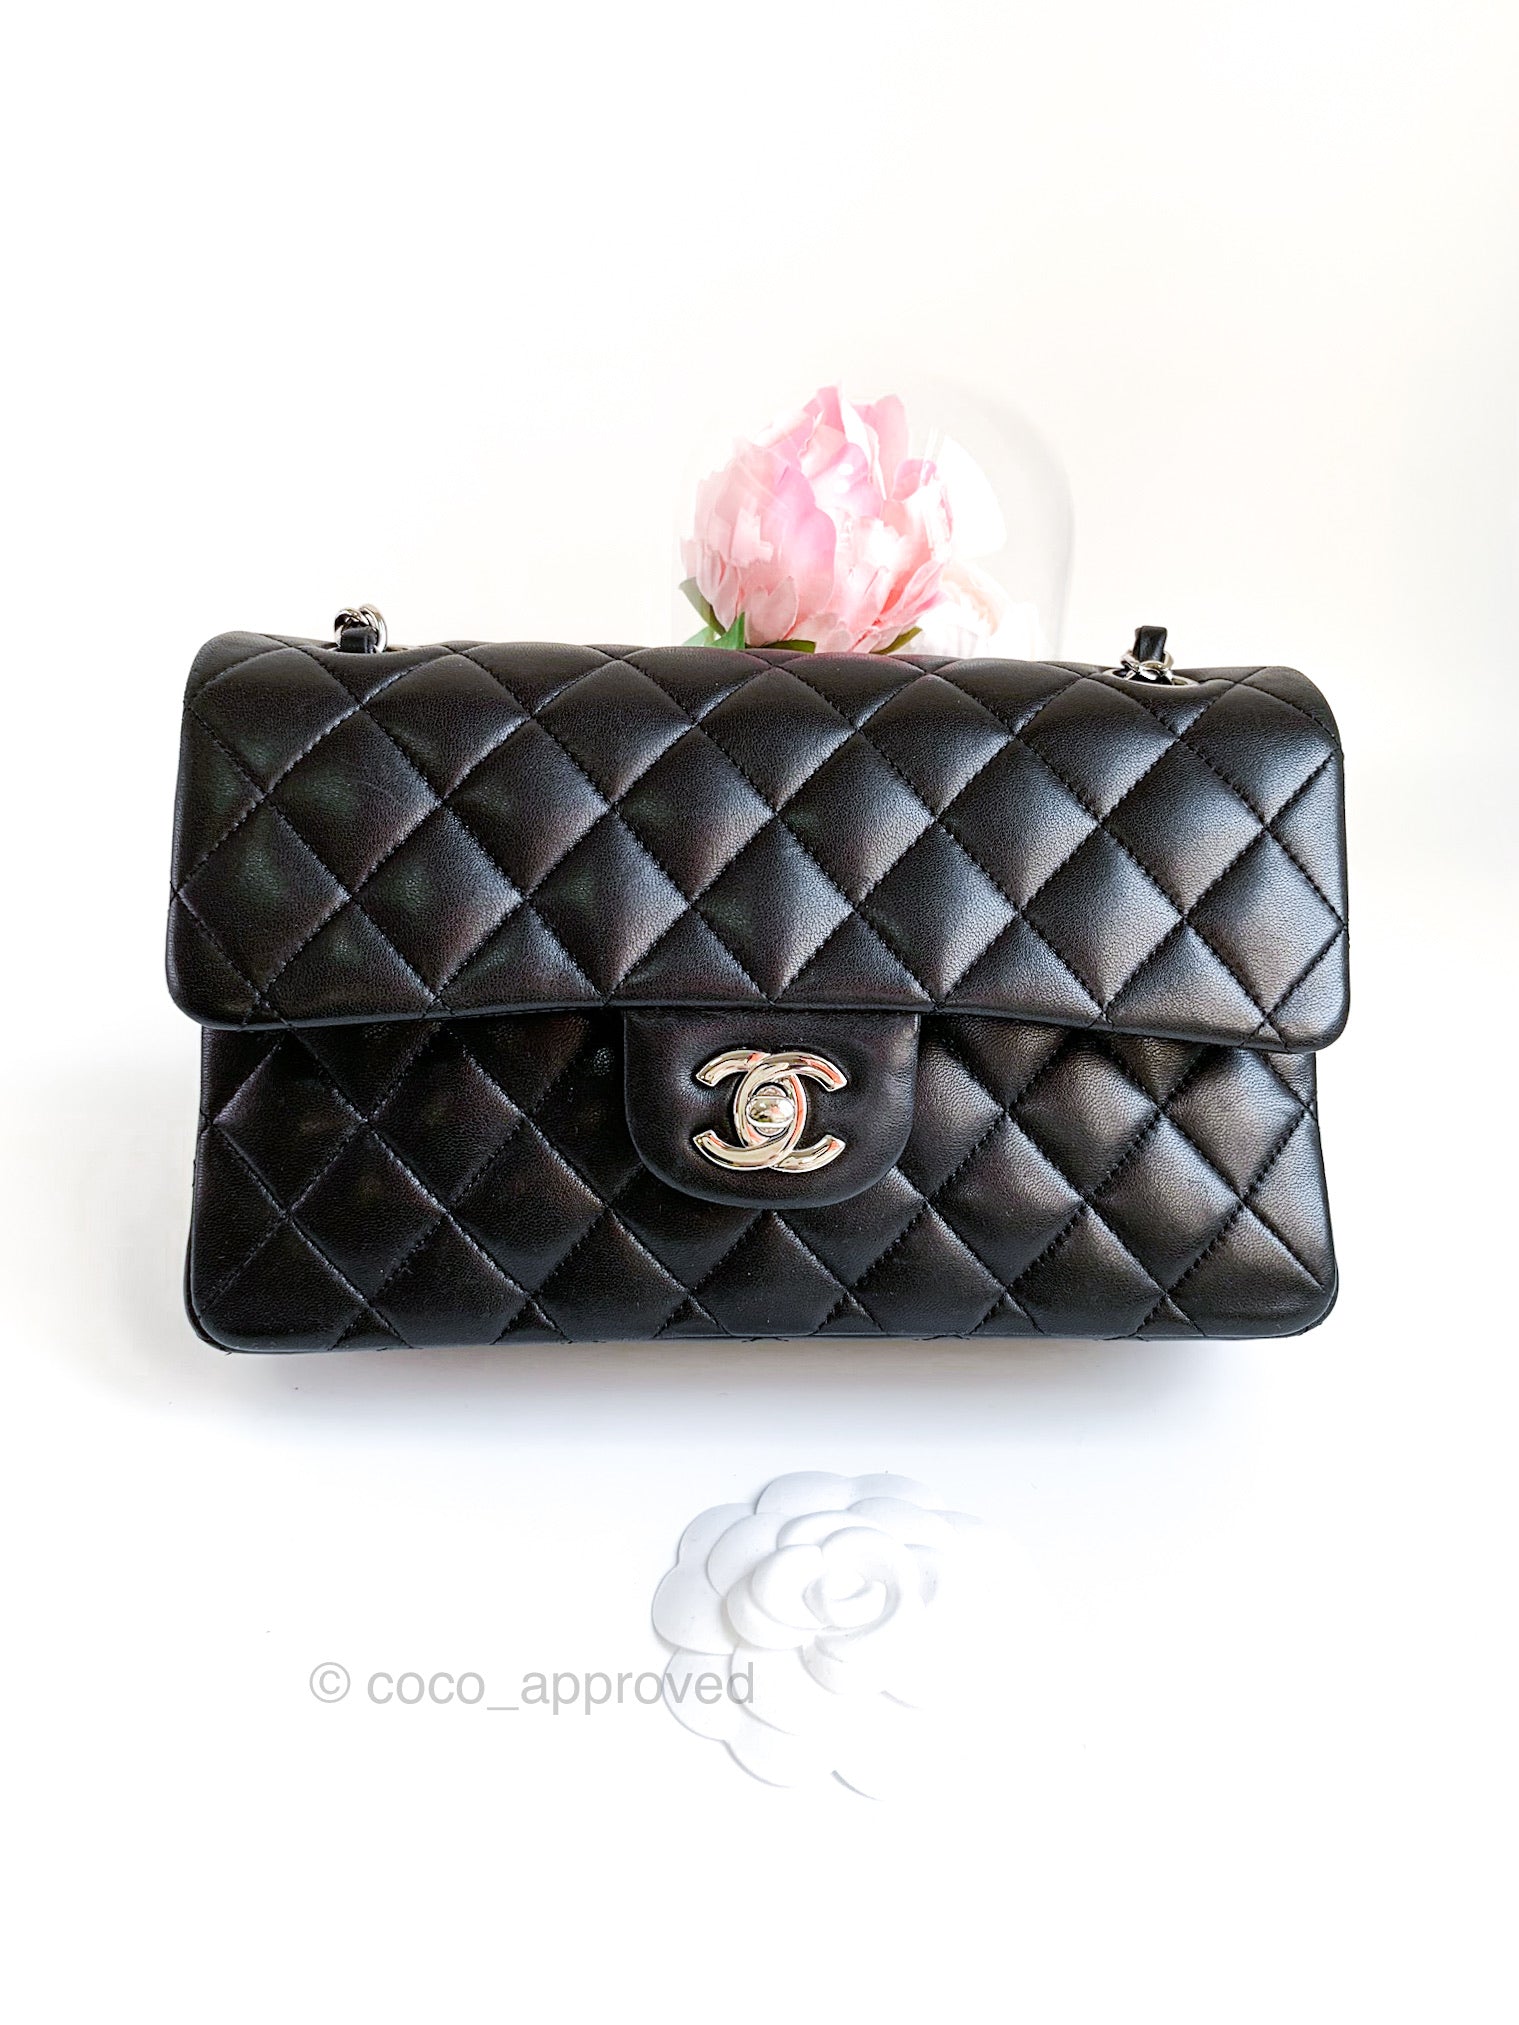 Chanel Black small lambskin Classic gold hardware double flap bag